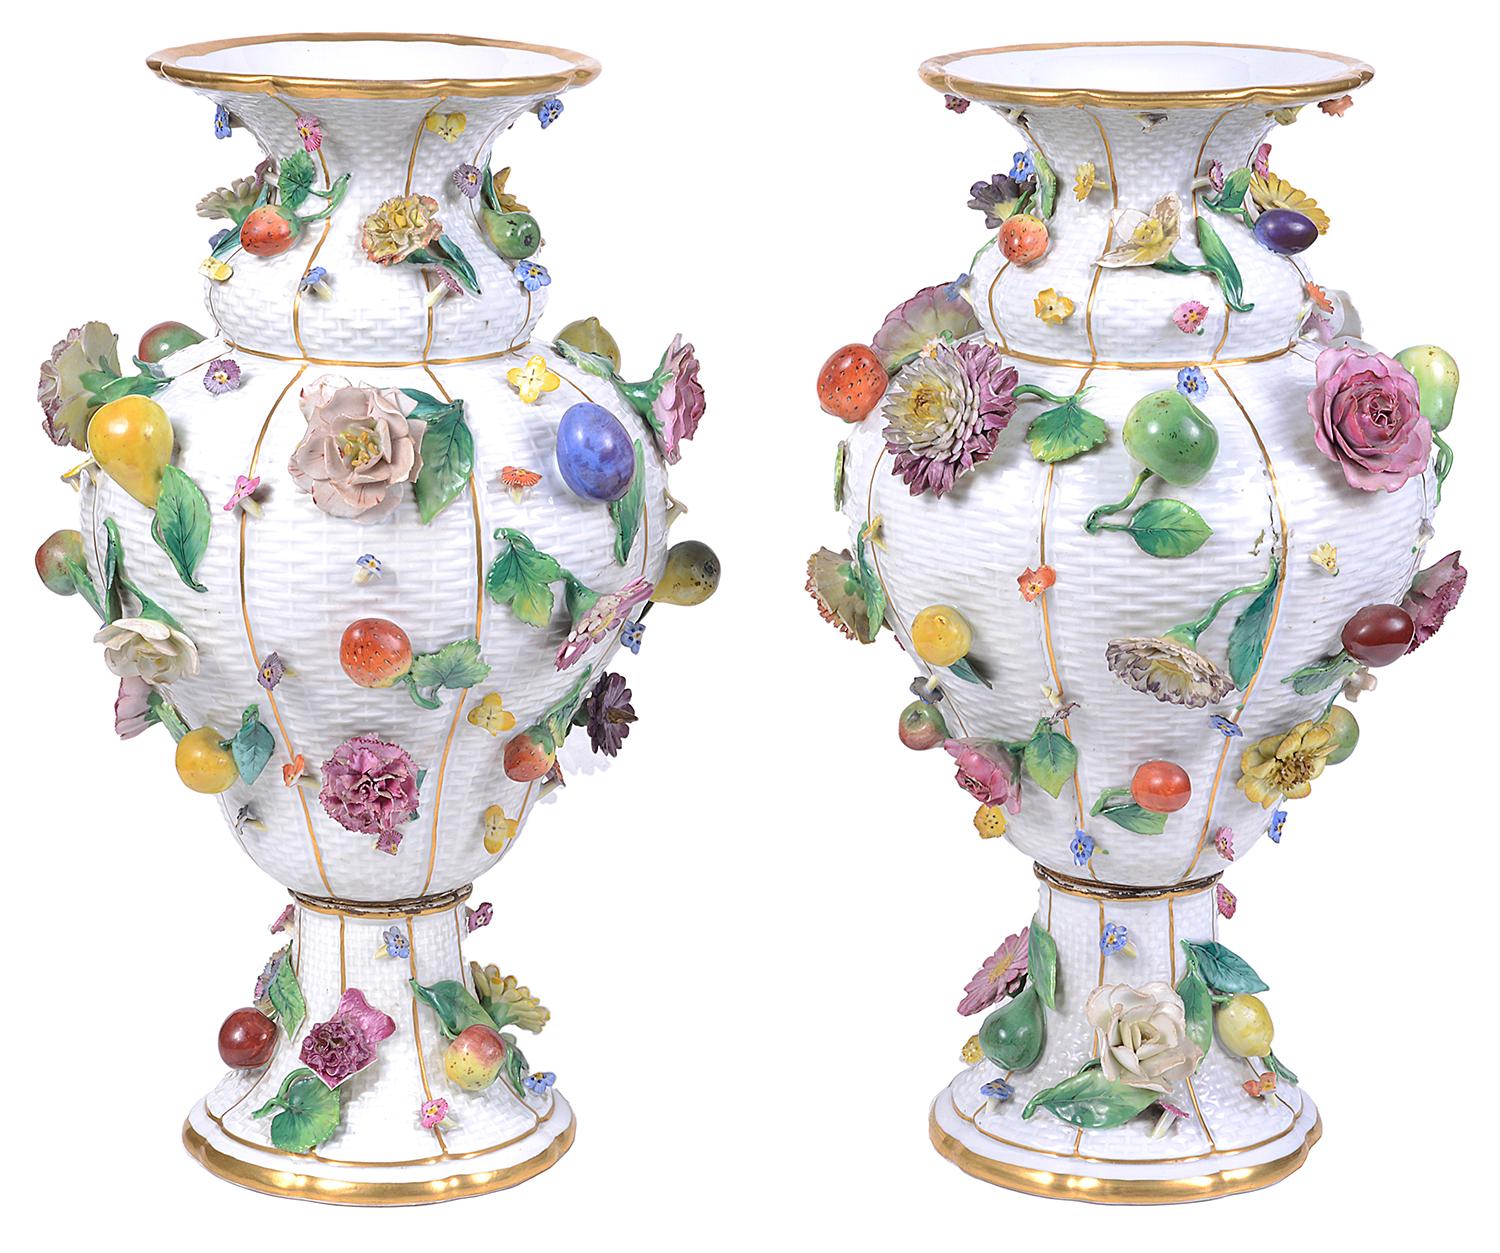 A very good quality pair of 19th century Meissen Porcelain flower encrusted vases, each with a white basket weave ground, wonderful brightly colored flowers and fruit.
Signed to the bases with Blue crossed swords.